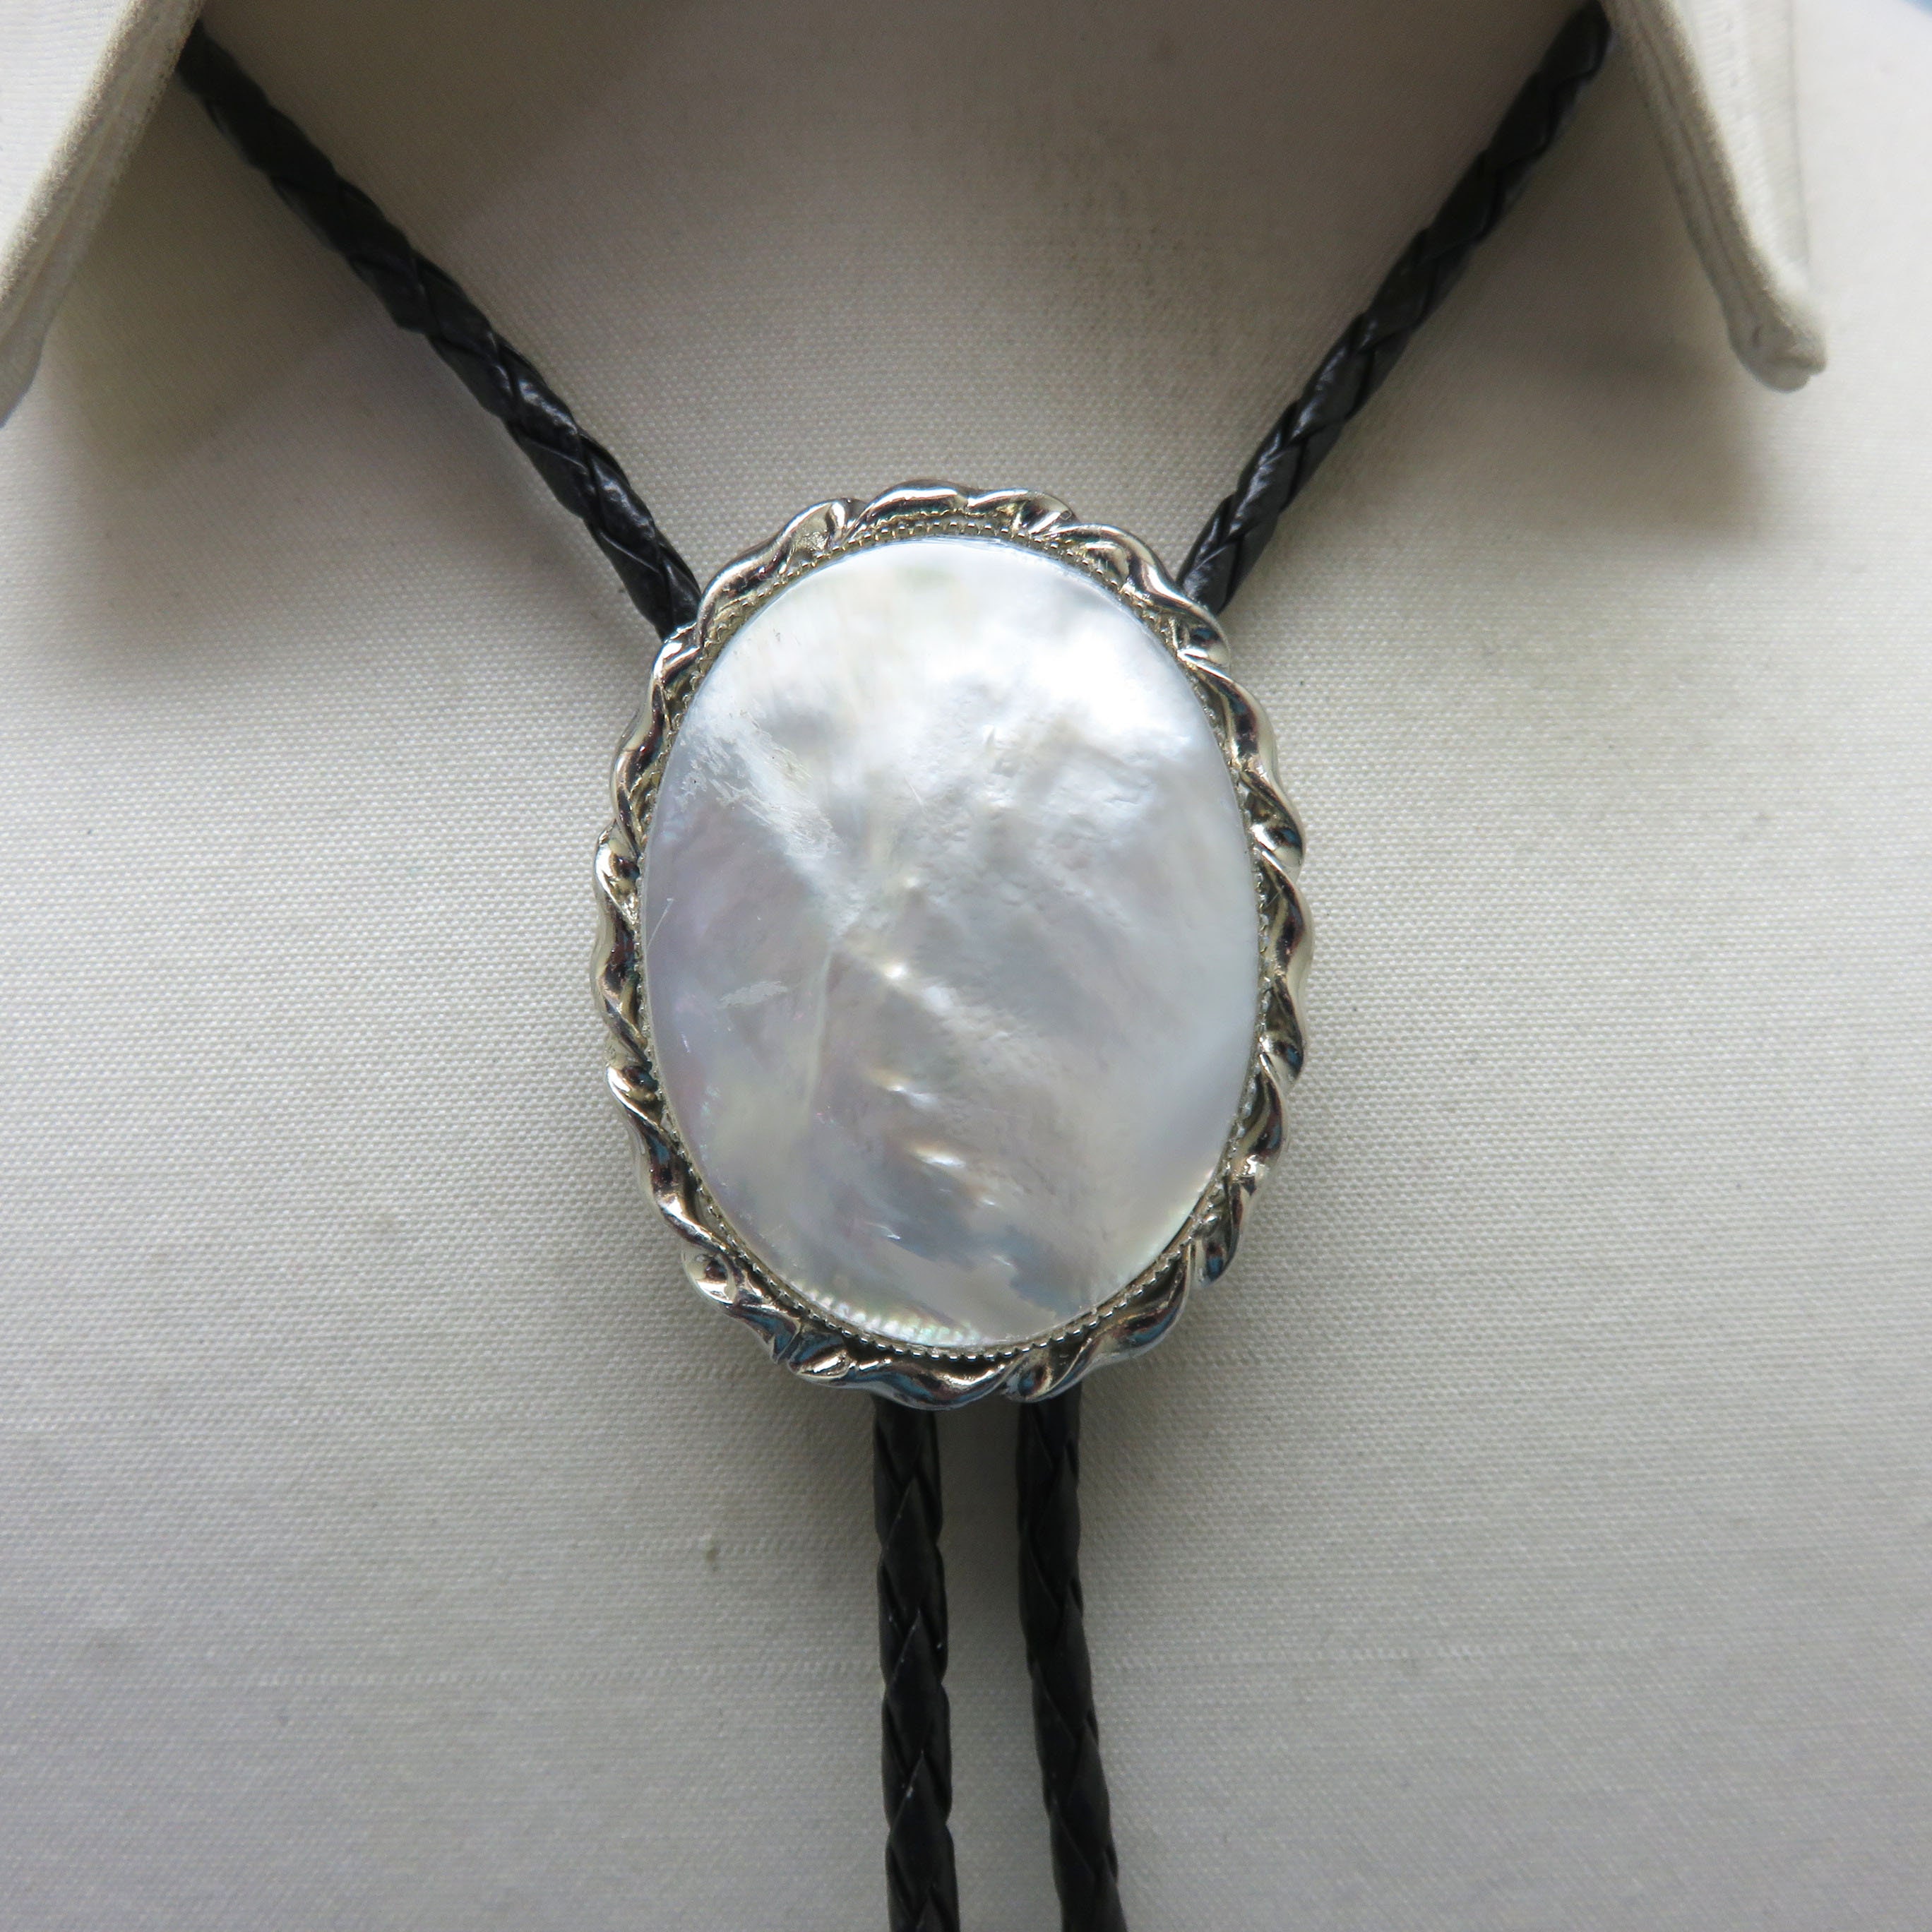 Dainty Mother of Pearl Heart Necklace Bolo Tie for Women 